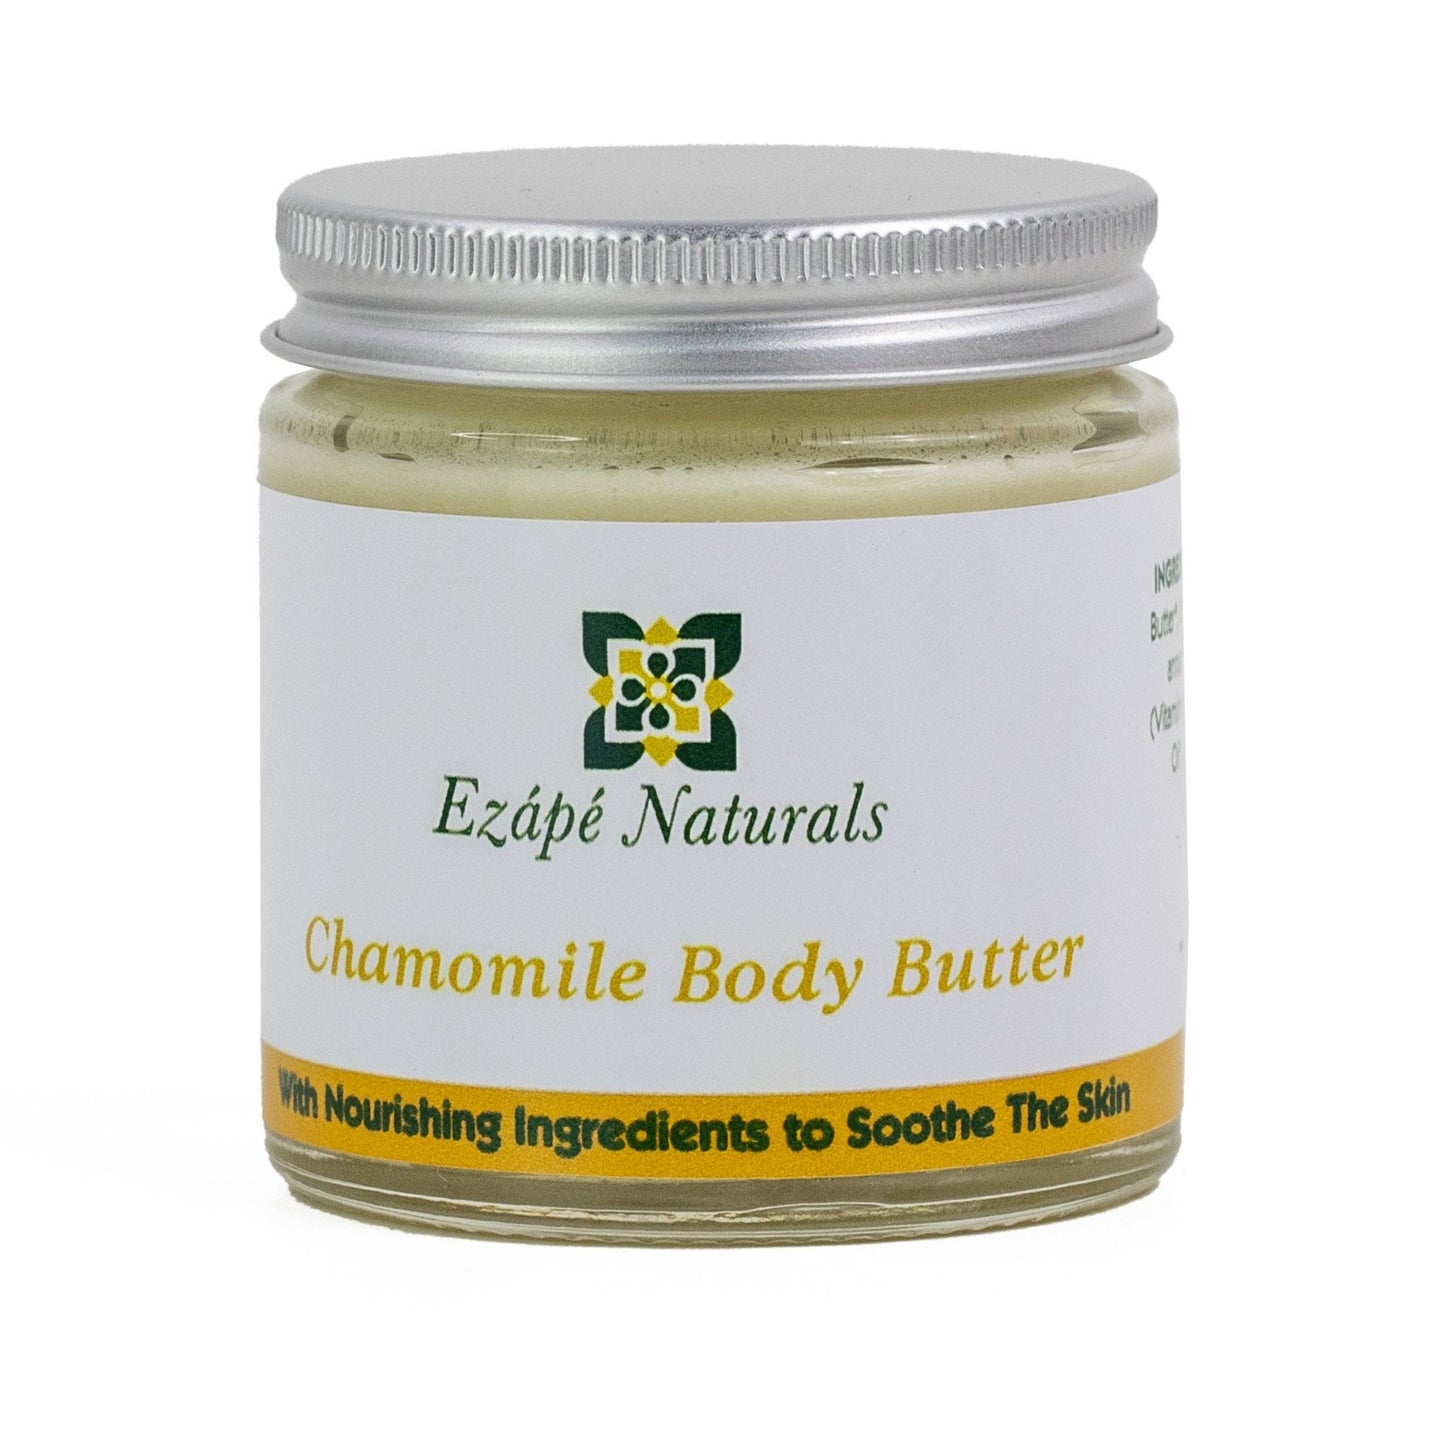 chamomile body butter in a clear glass jar and aluminium lid with a white and yellow label